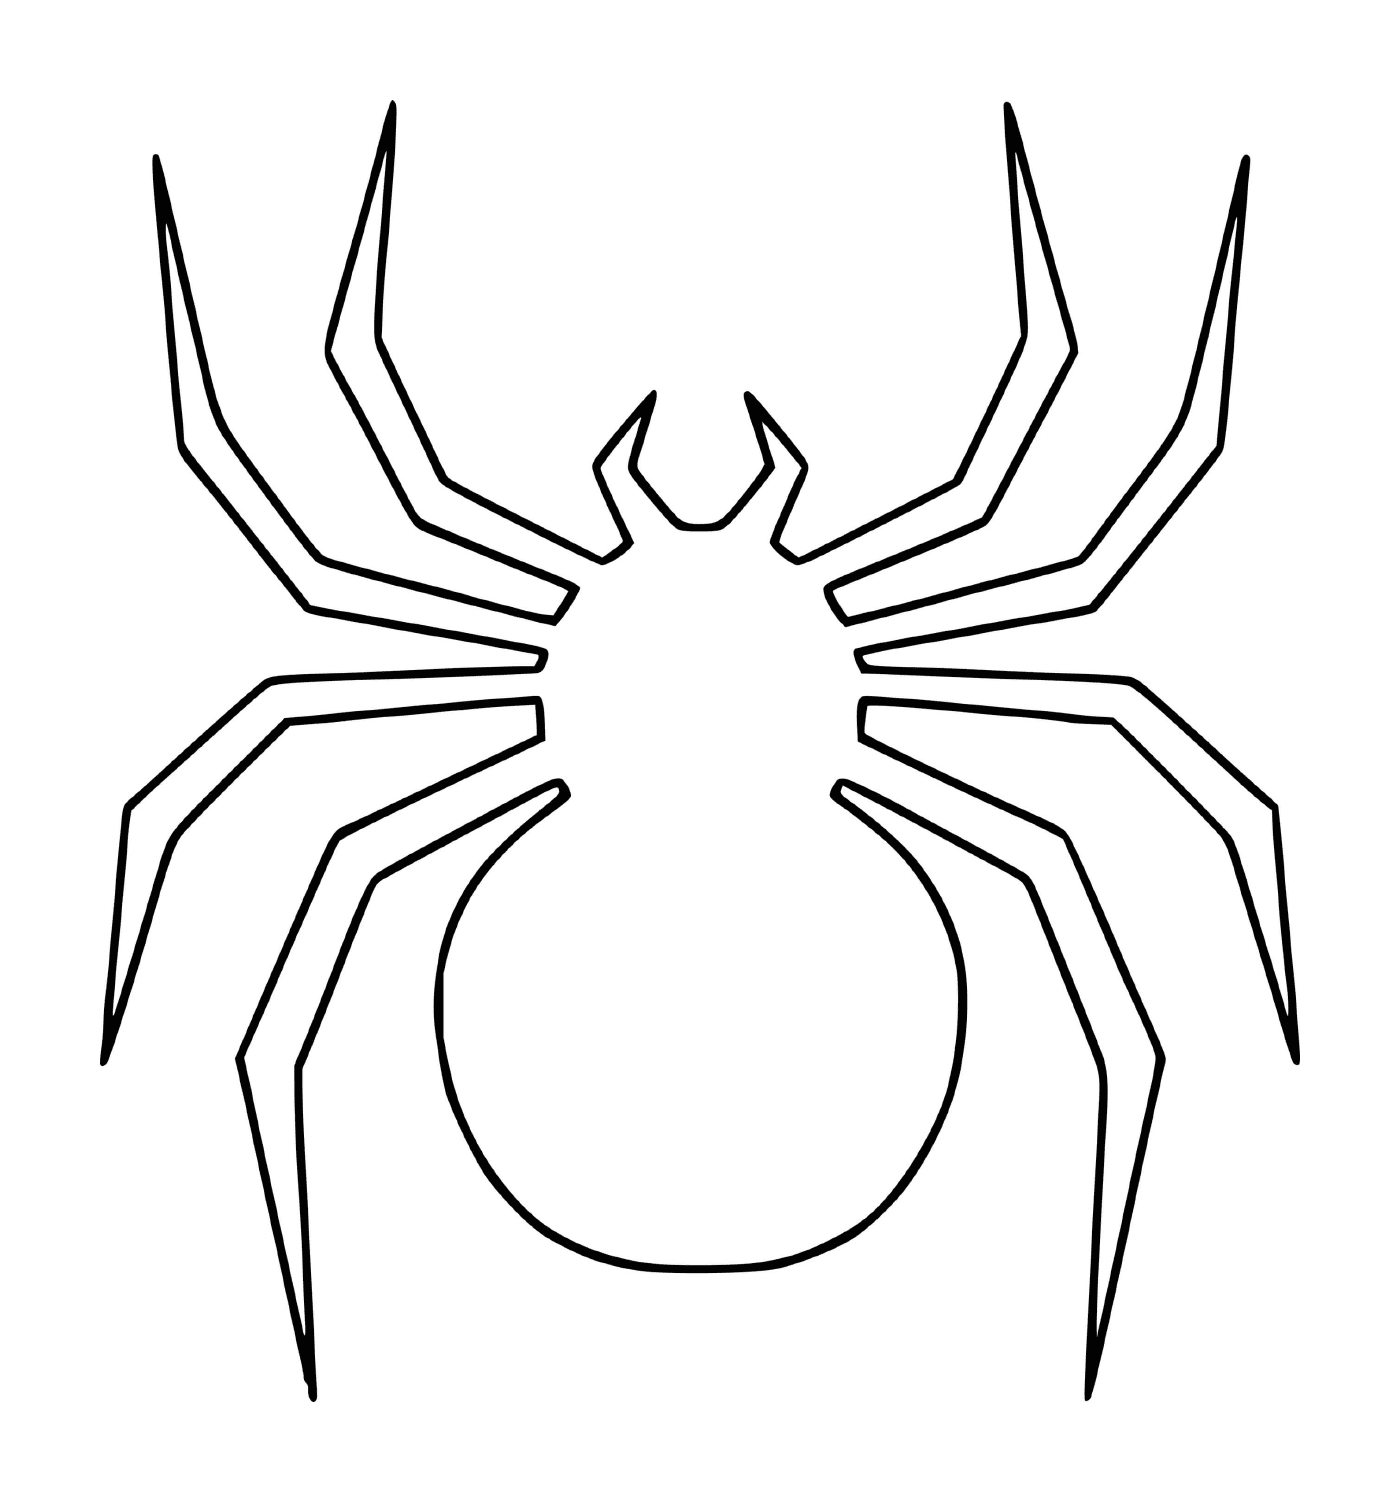  A giant spider 